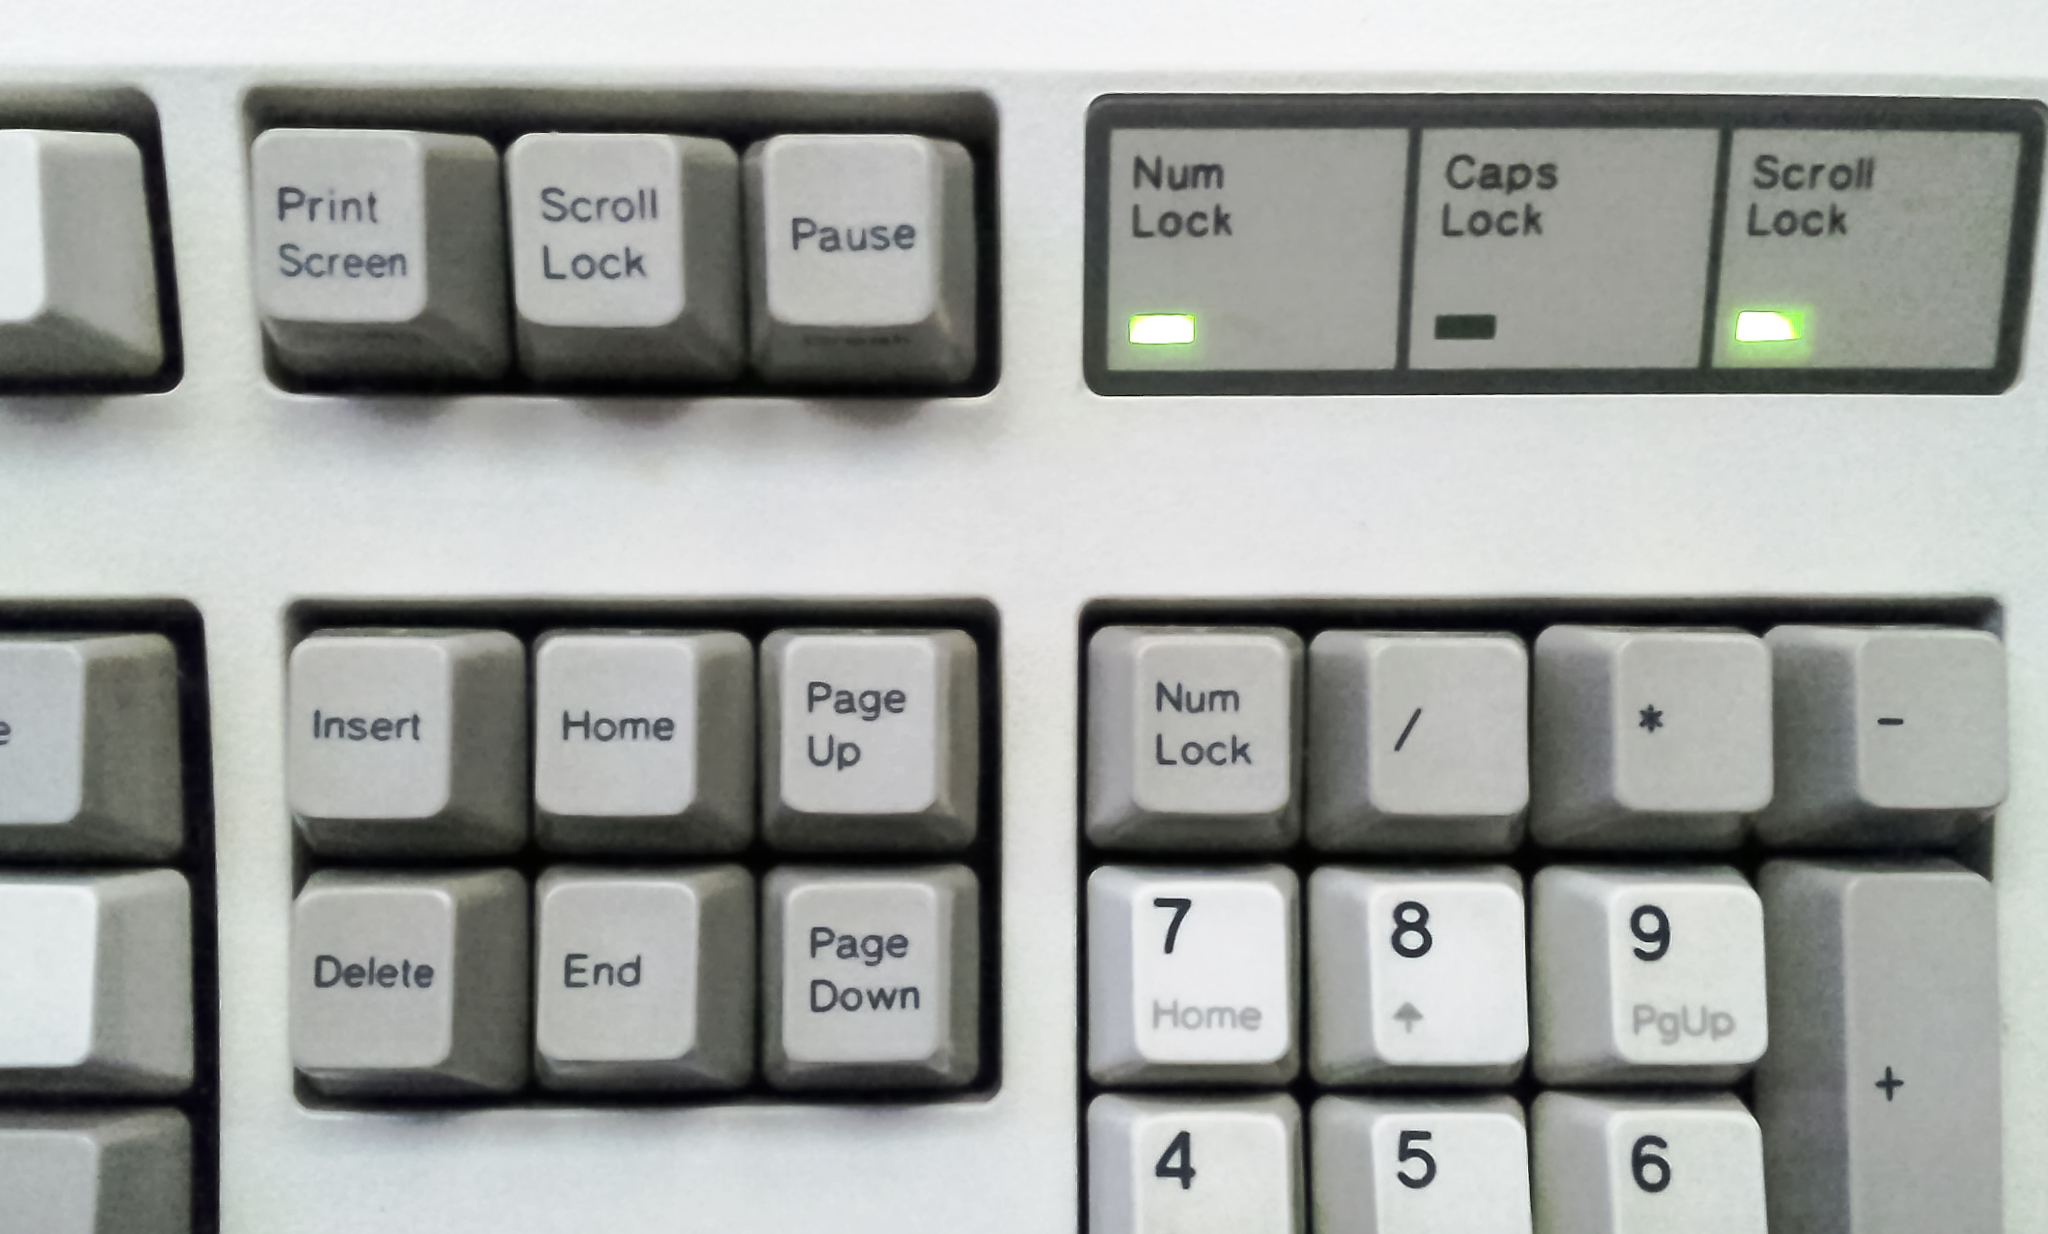 Keyboard with Caps Lock key highlighted